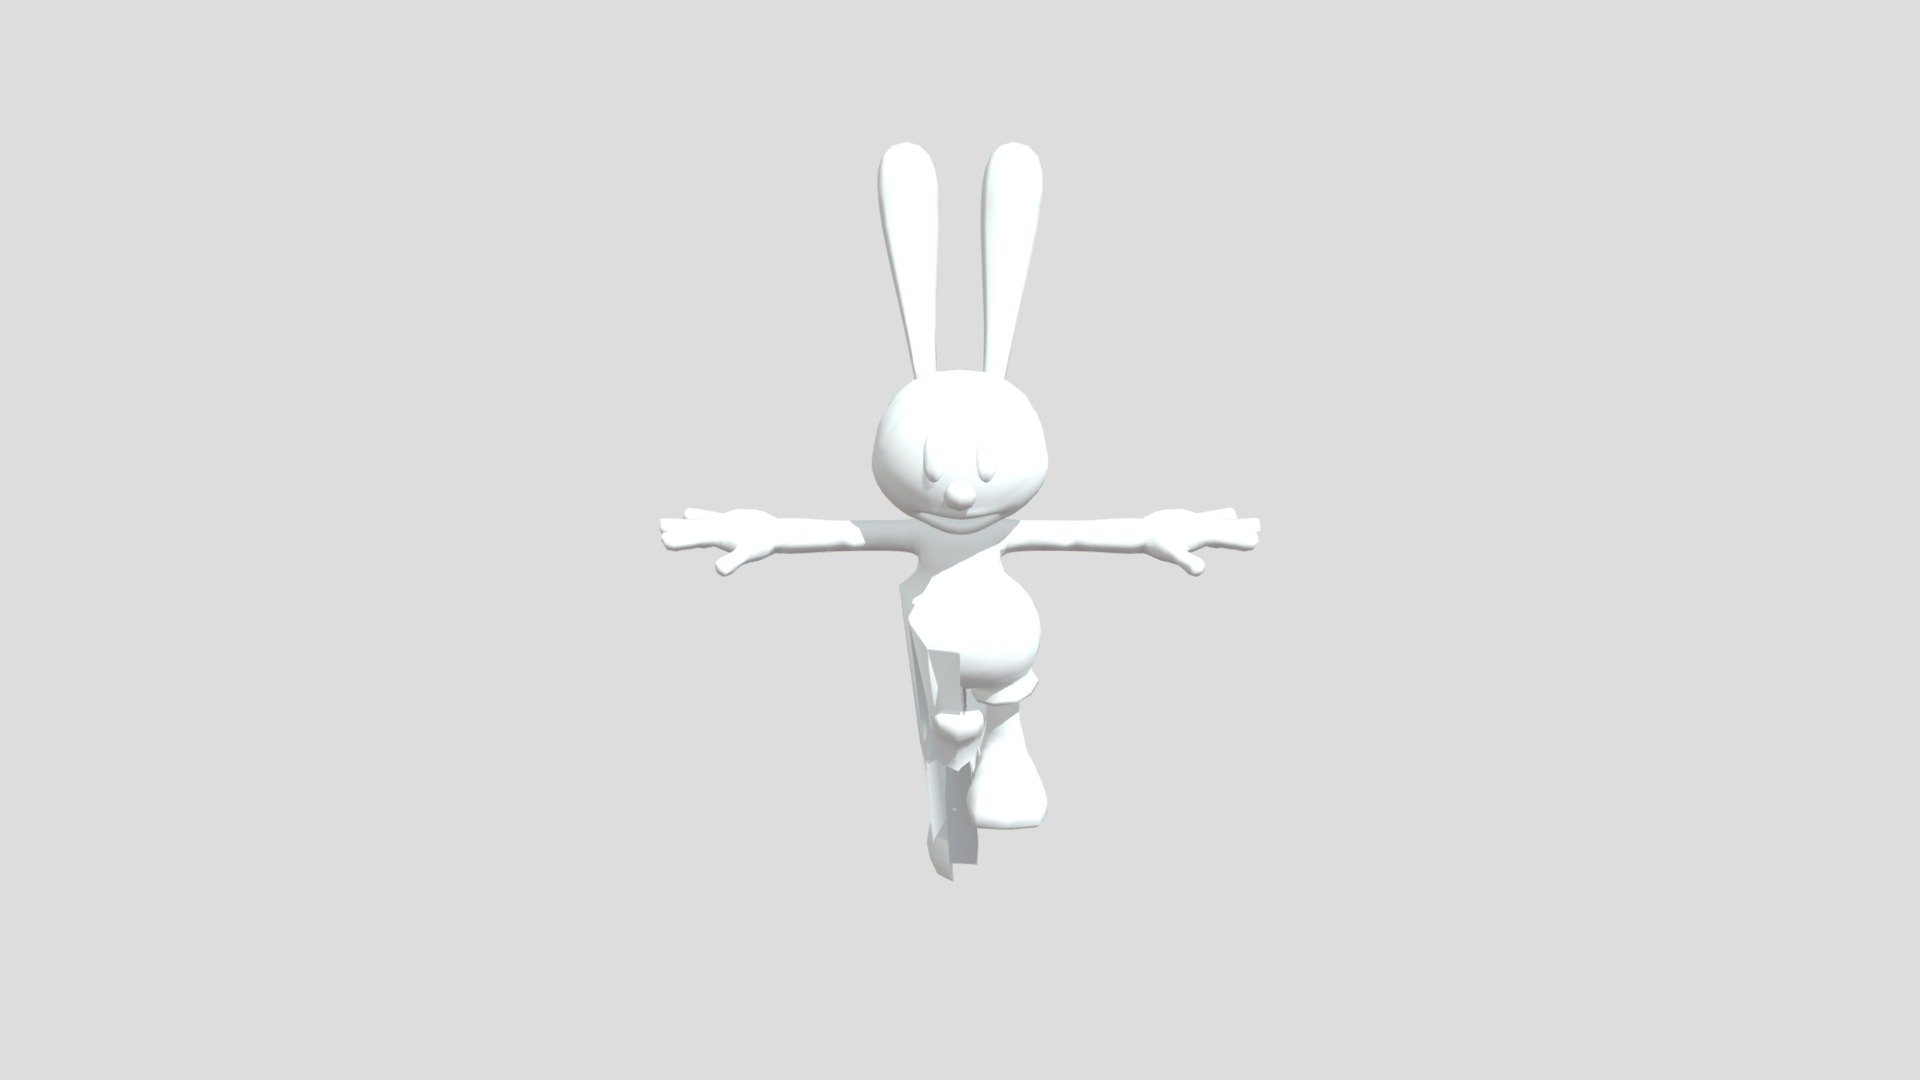 Oswald The Lucky Rabbit - 3D model by secret.secrfh [efff611] - Sketchfab